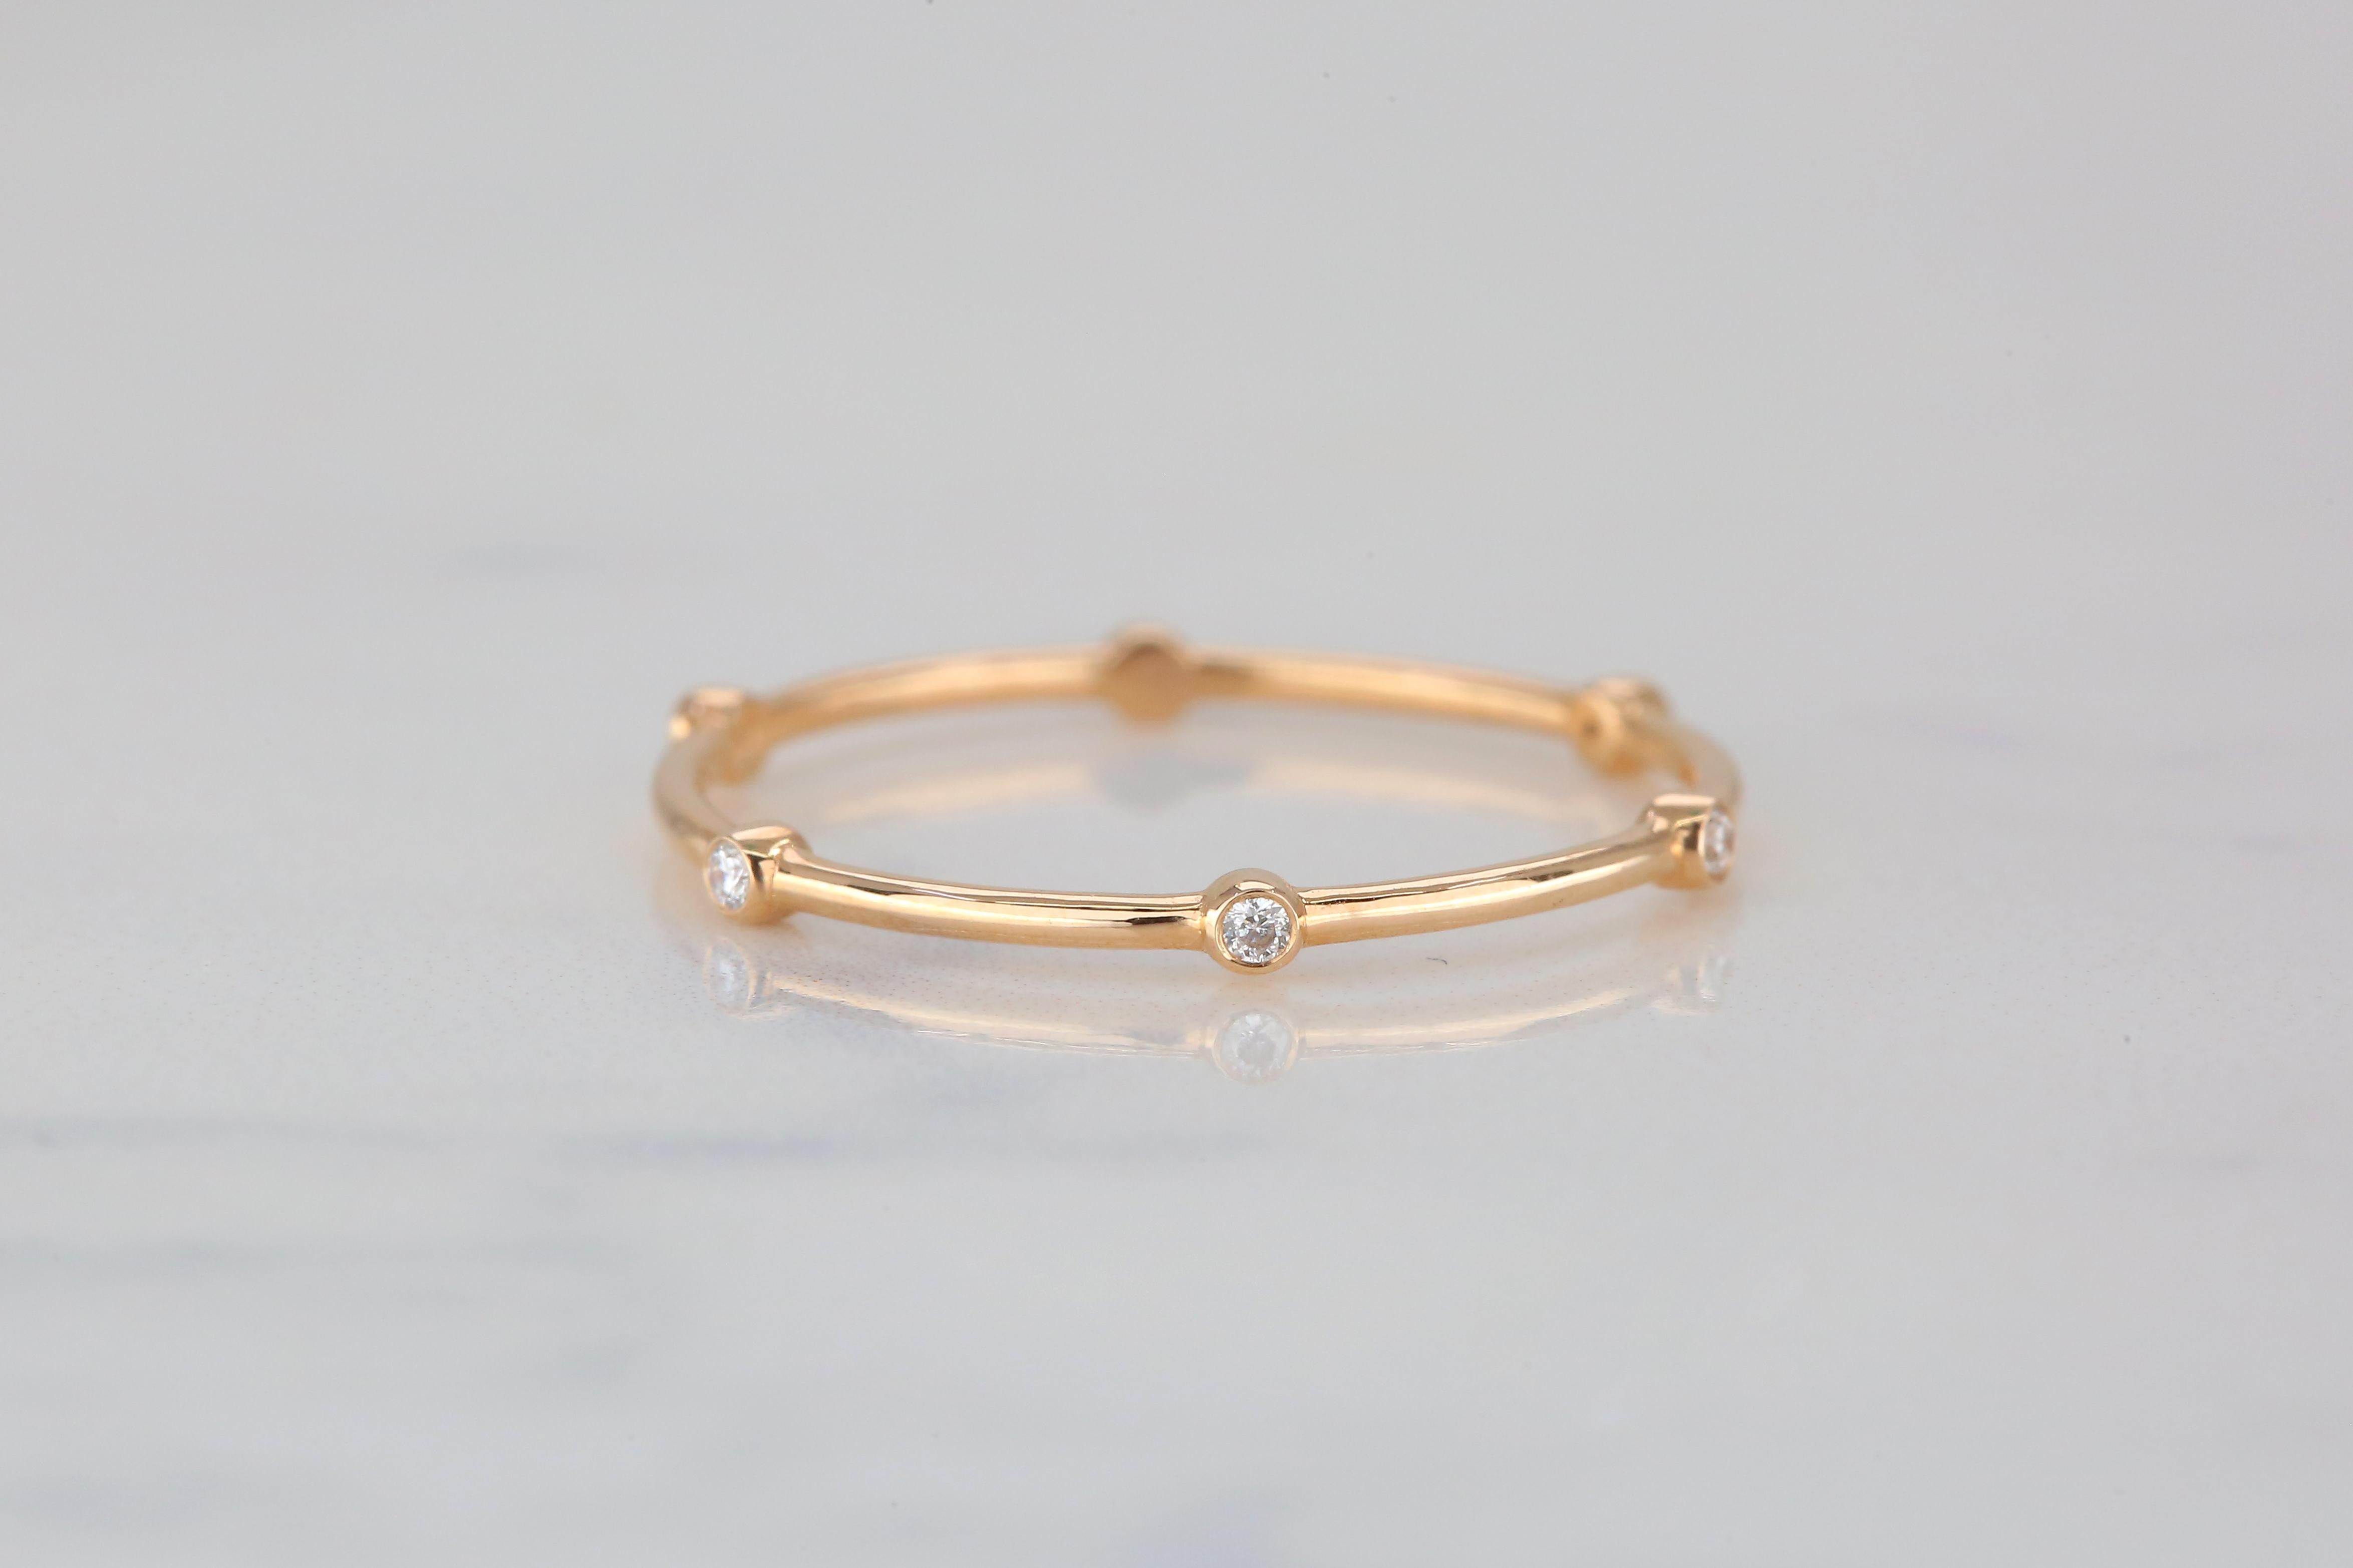 For Sale:  Six Bezel Diamond Ring, 14K Solid Gold Dainty Ring, Stackable Ring, Minimalist 6